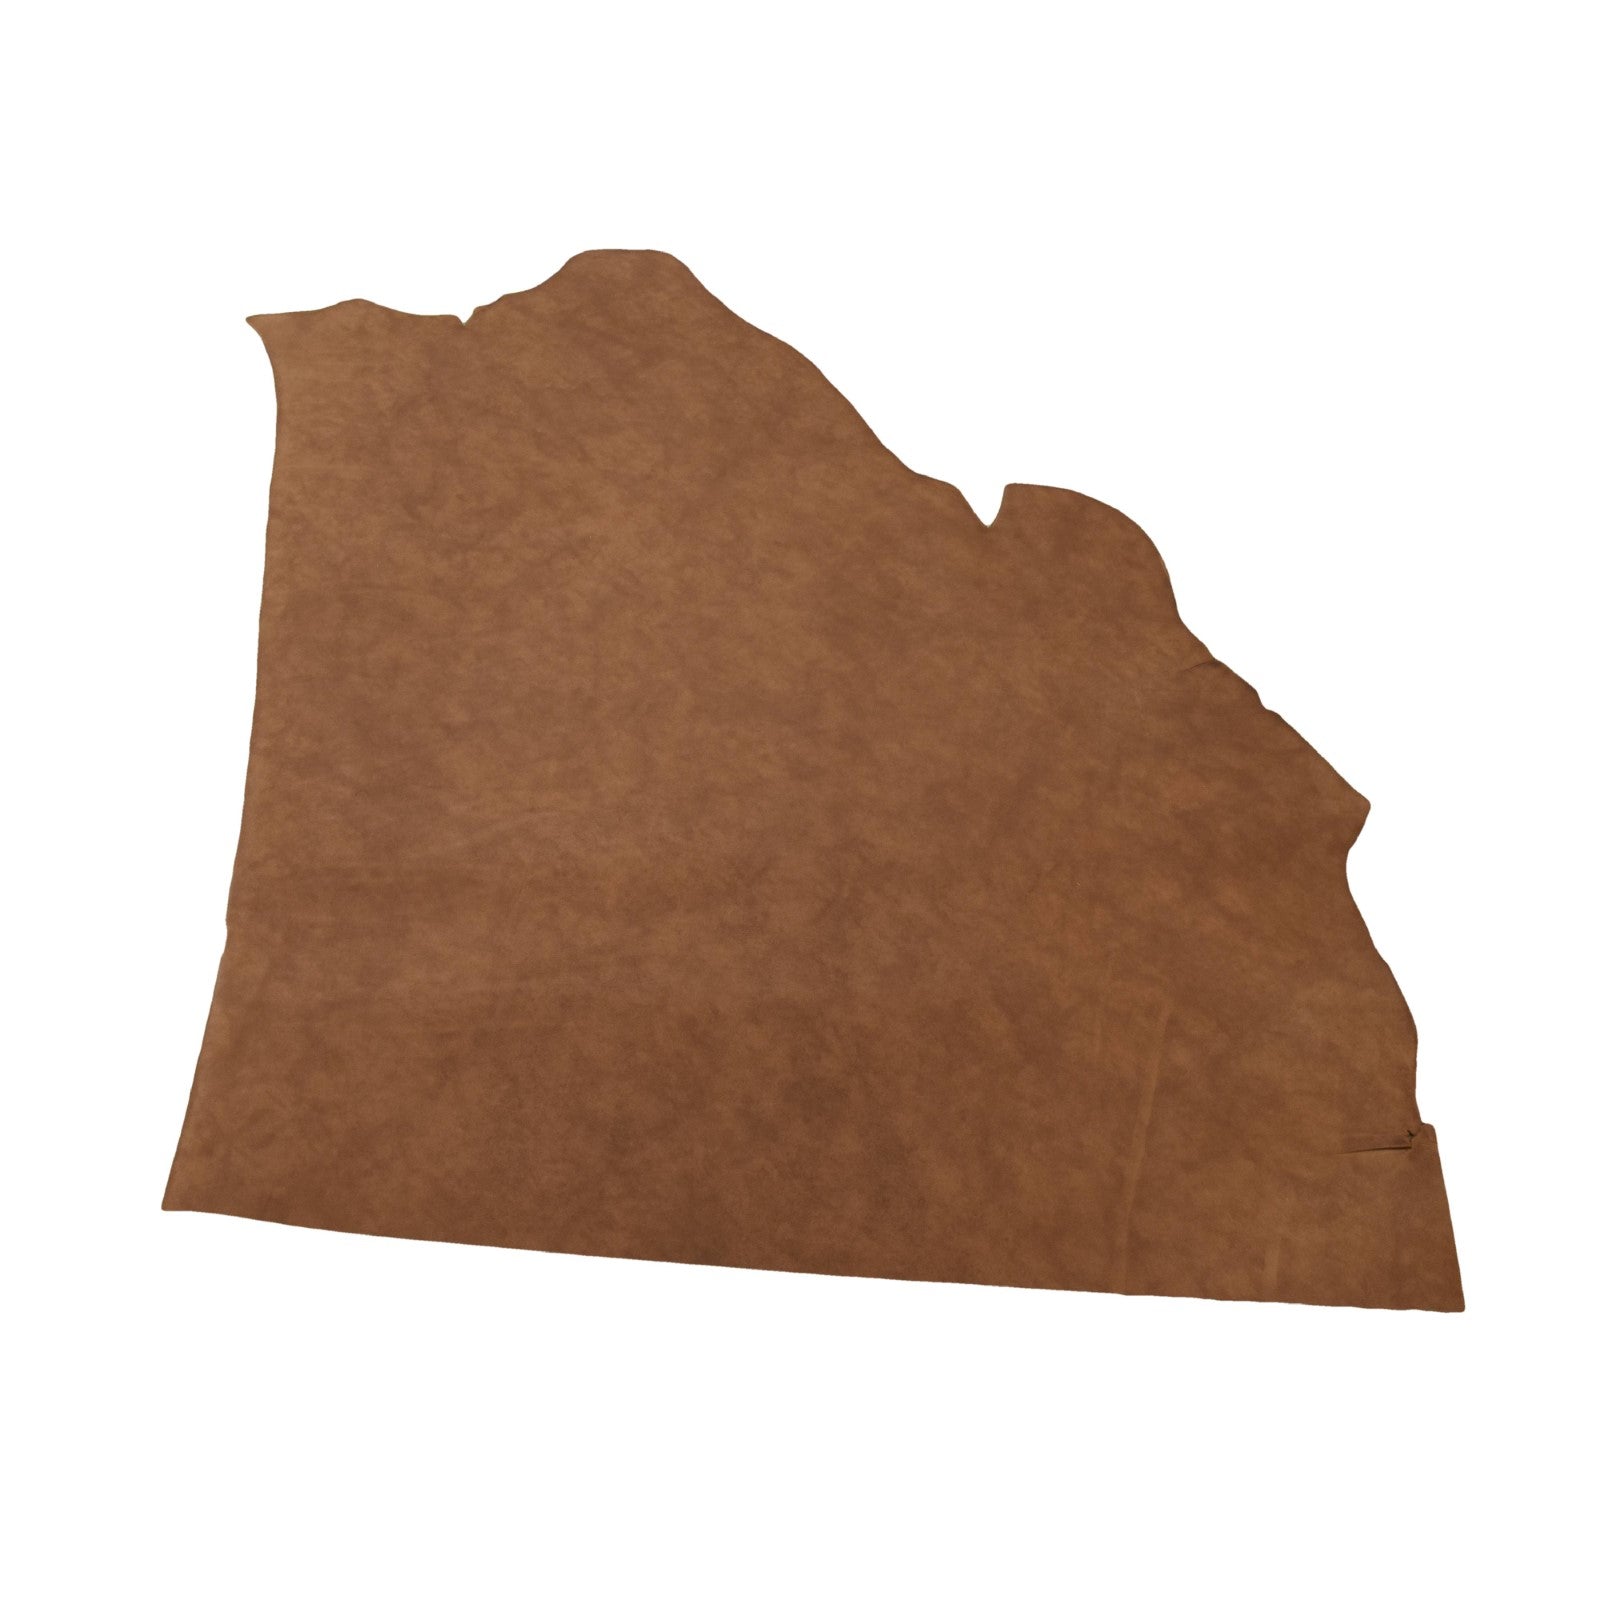 Big Wall Medium Brown, Oil Tanned Summits Edge Sides & Pieces, Top Piece / 6.5 - 7.5 Sq Ft | The Leather Guy